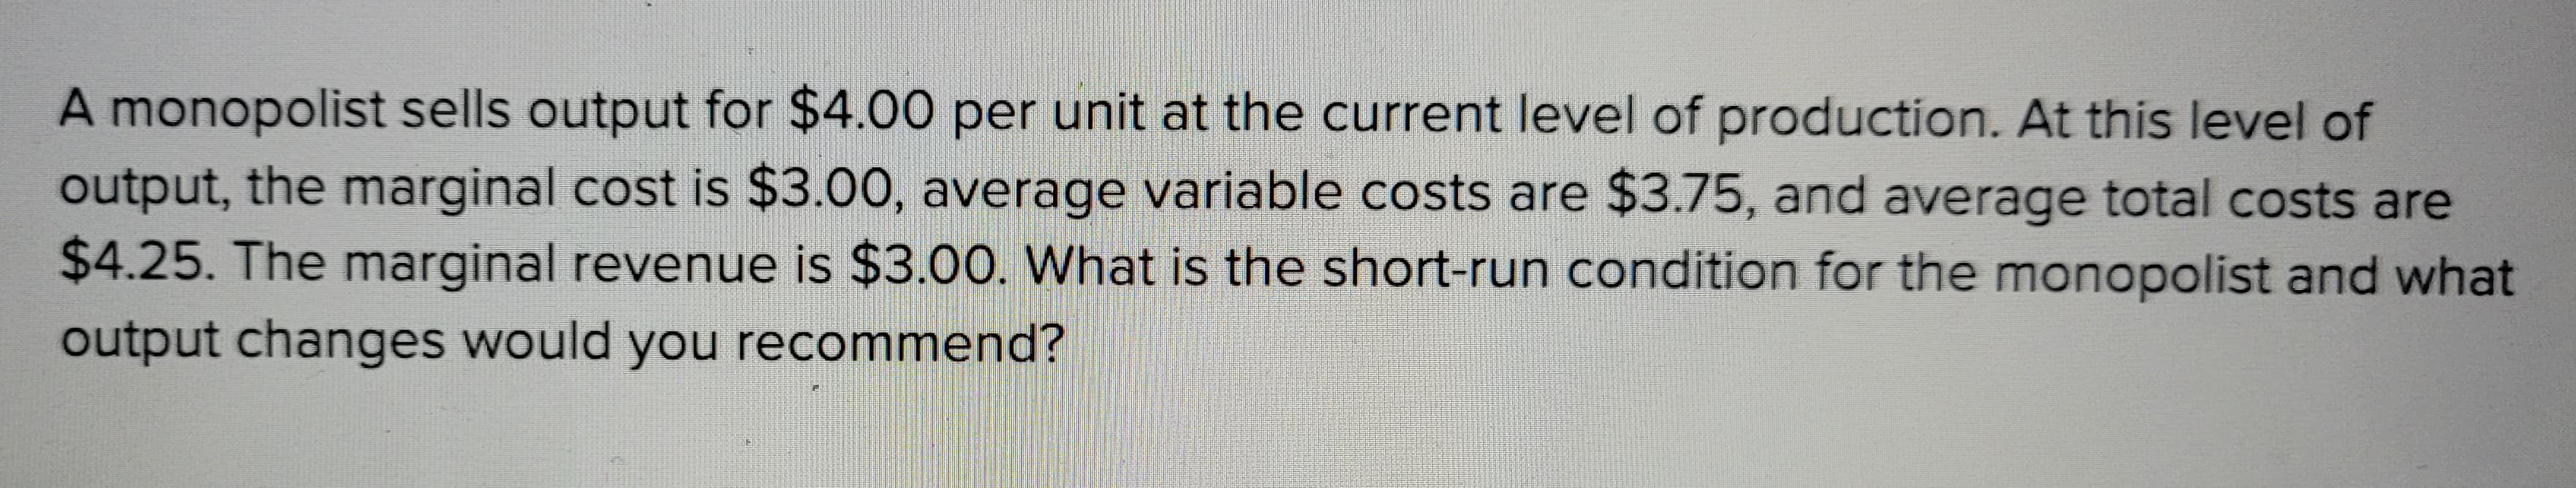 A monopolist sells output for $4.00 per unit at the current level of production. At this level of
output, the marginal cost is $3.00, average variable costs are $3.75, and average total costs are
$4.25. The marginal revenue is $3.00. What is the short-run condition for the monopolist and what
output changes would you recommend?